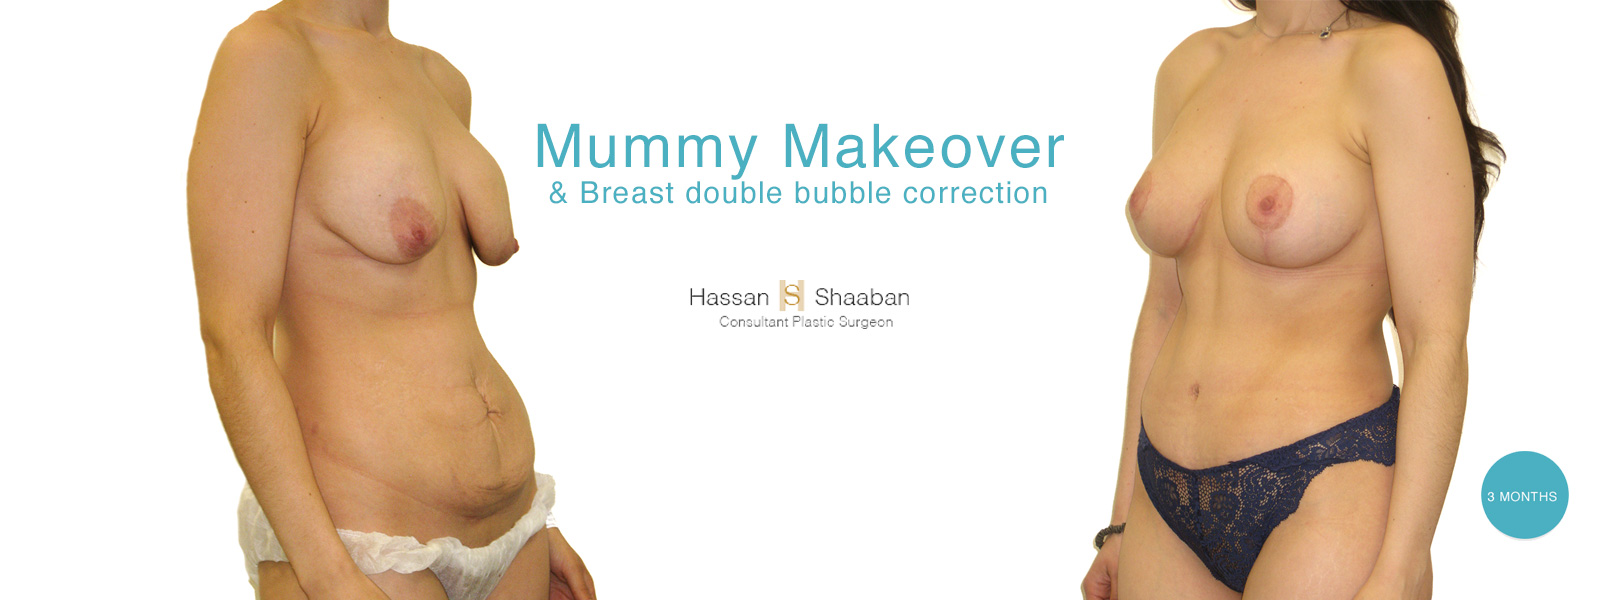 mummy makeover before and after surgery before and after at 3 months